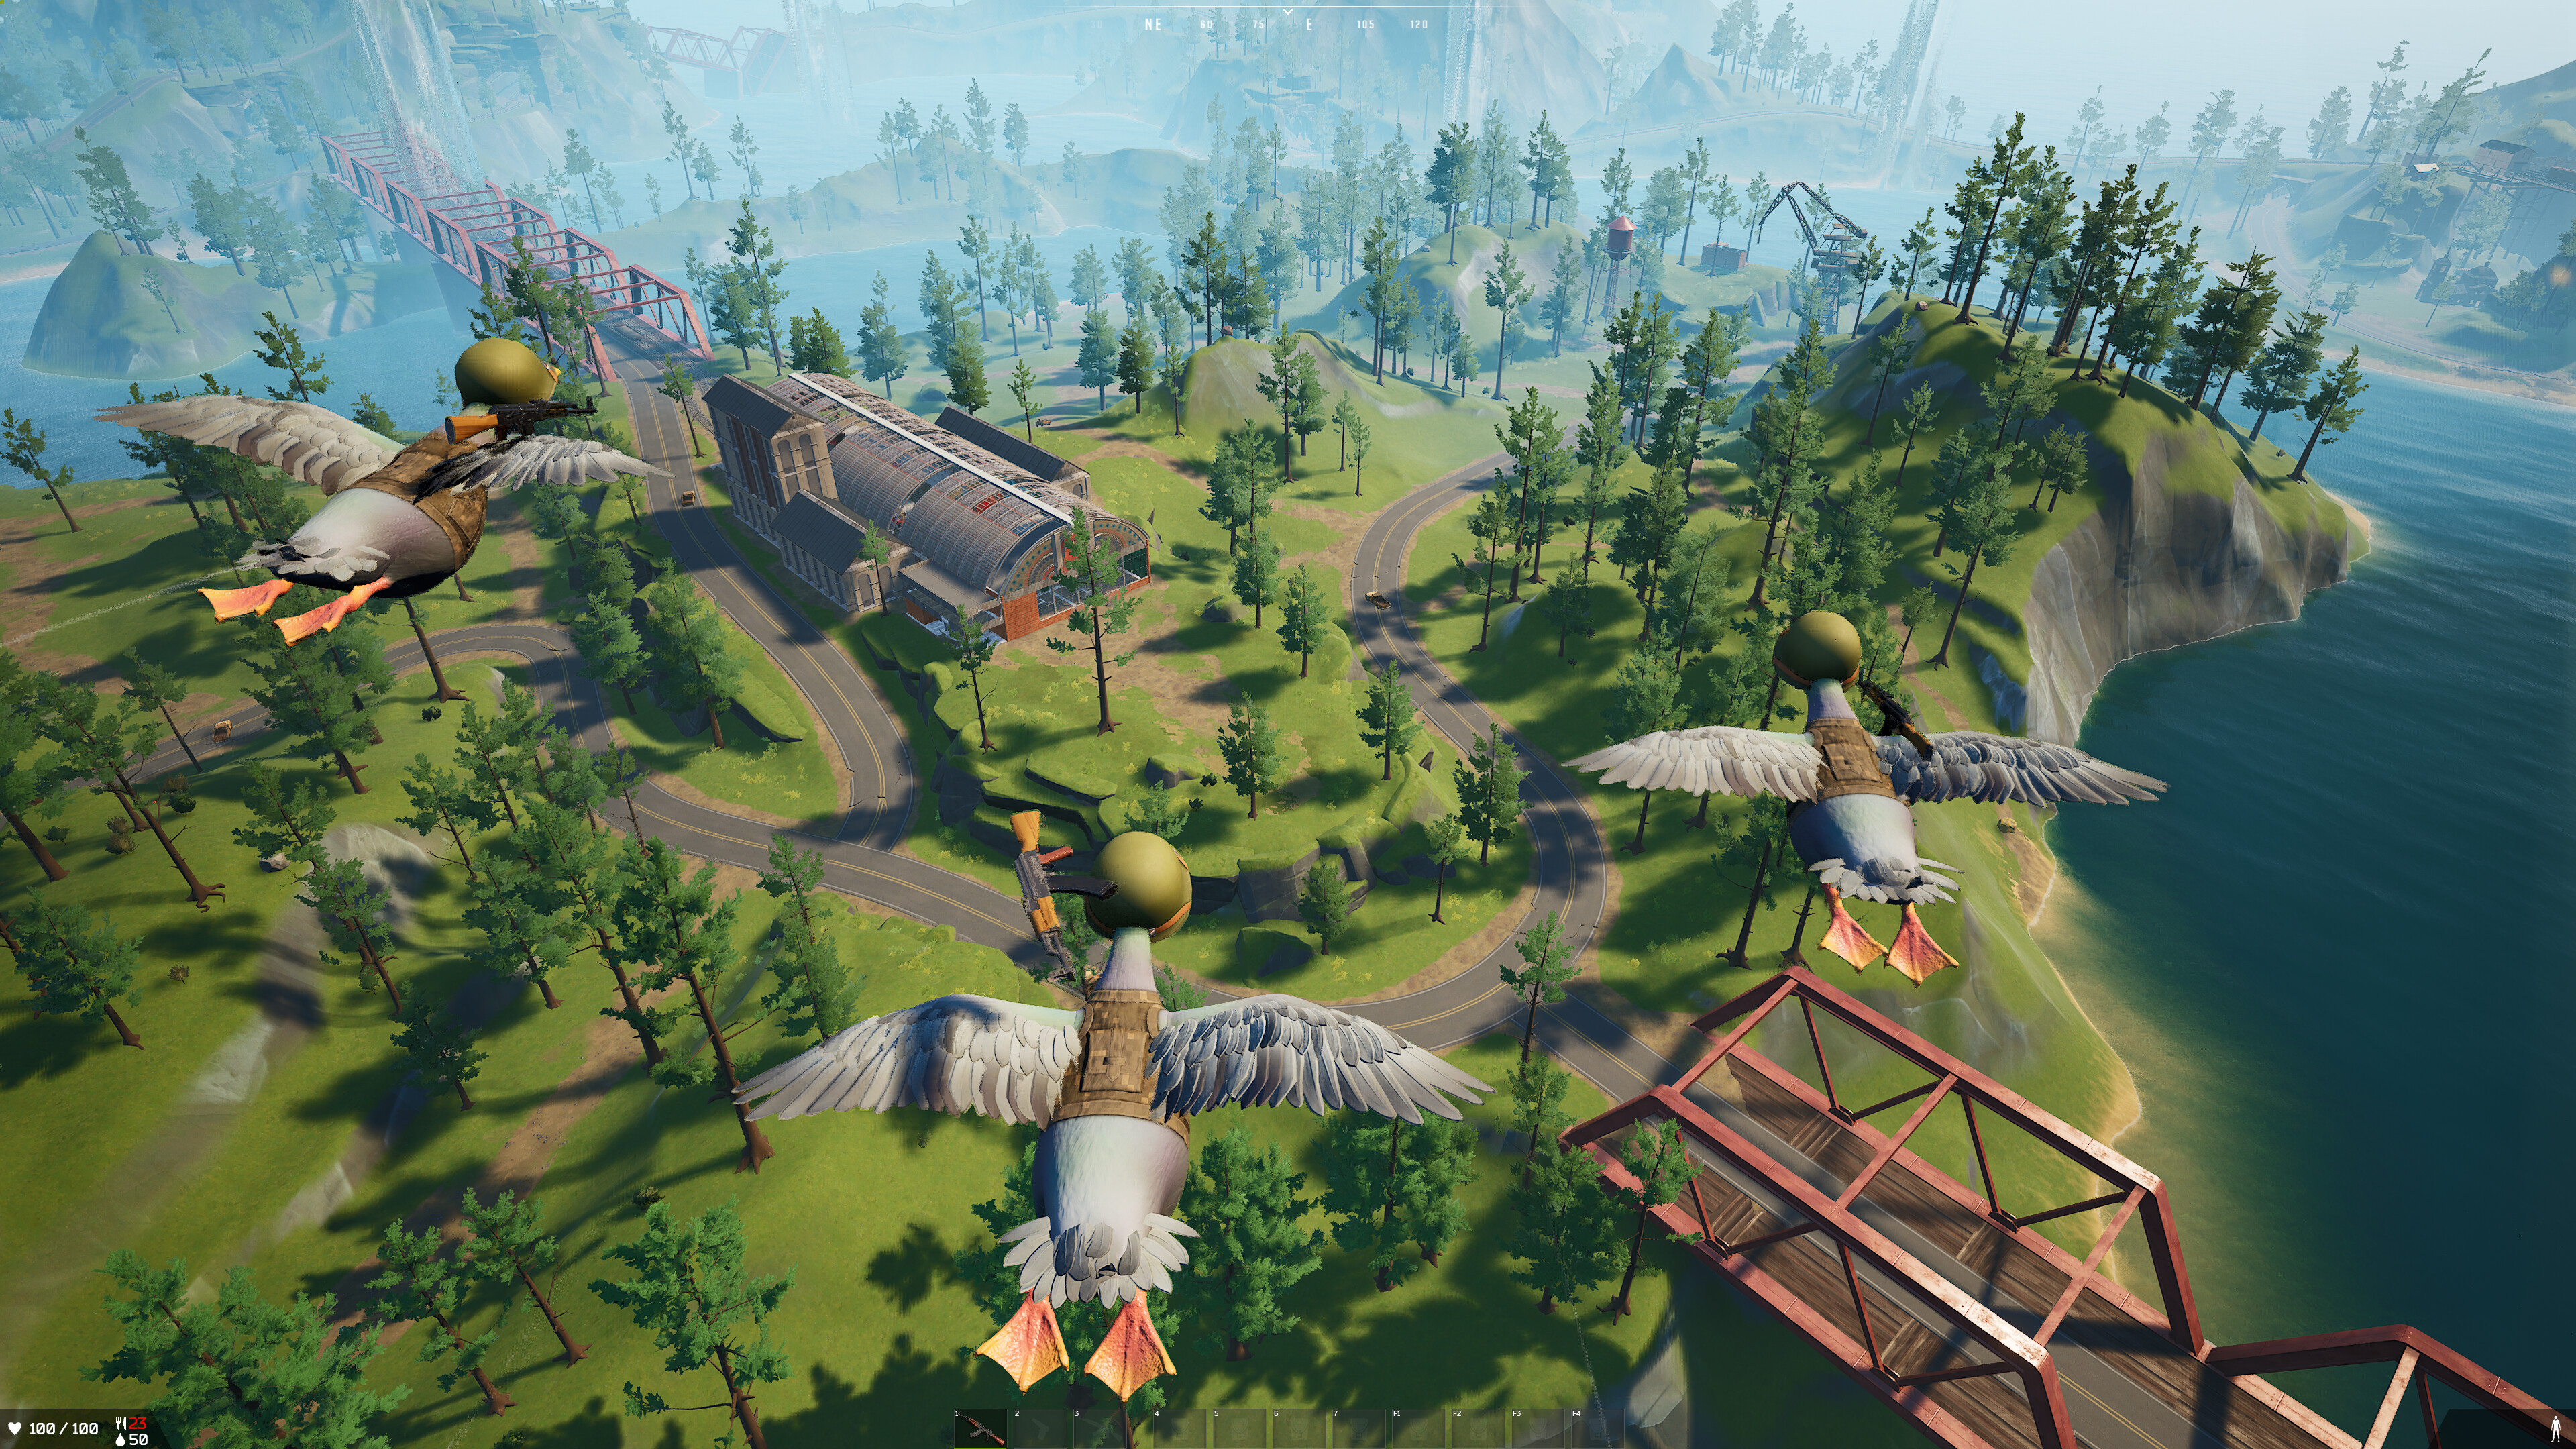  New multiplayer survival game features crafting, base building, automatic weapons and flying. The twist? Everyone plays as a bunch of ducks 